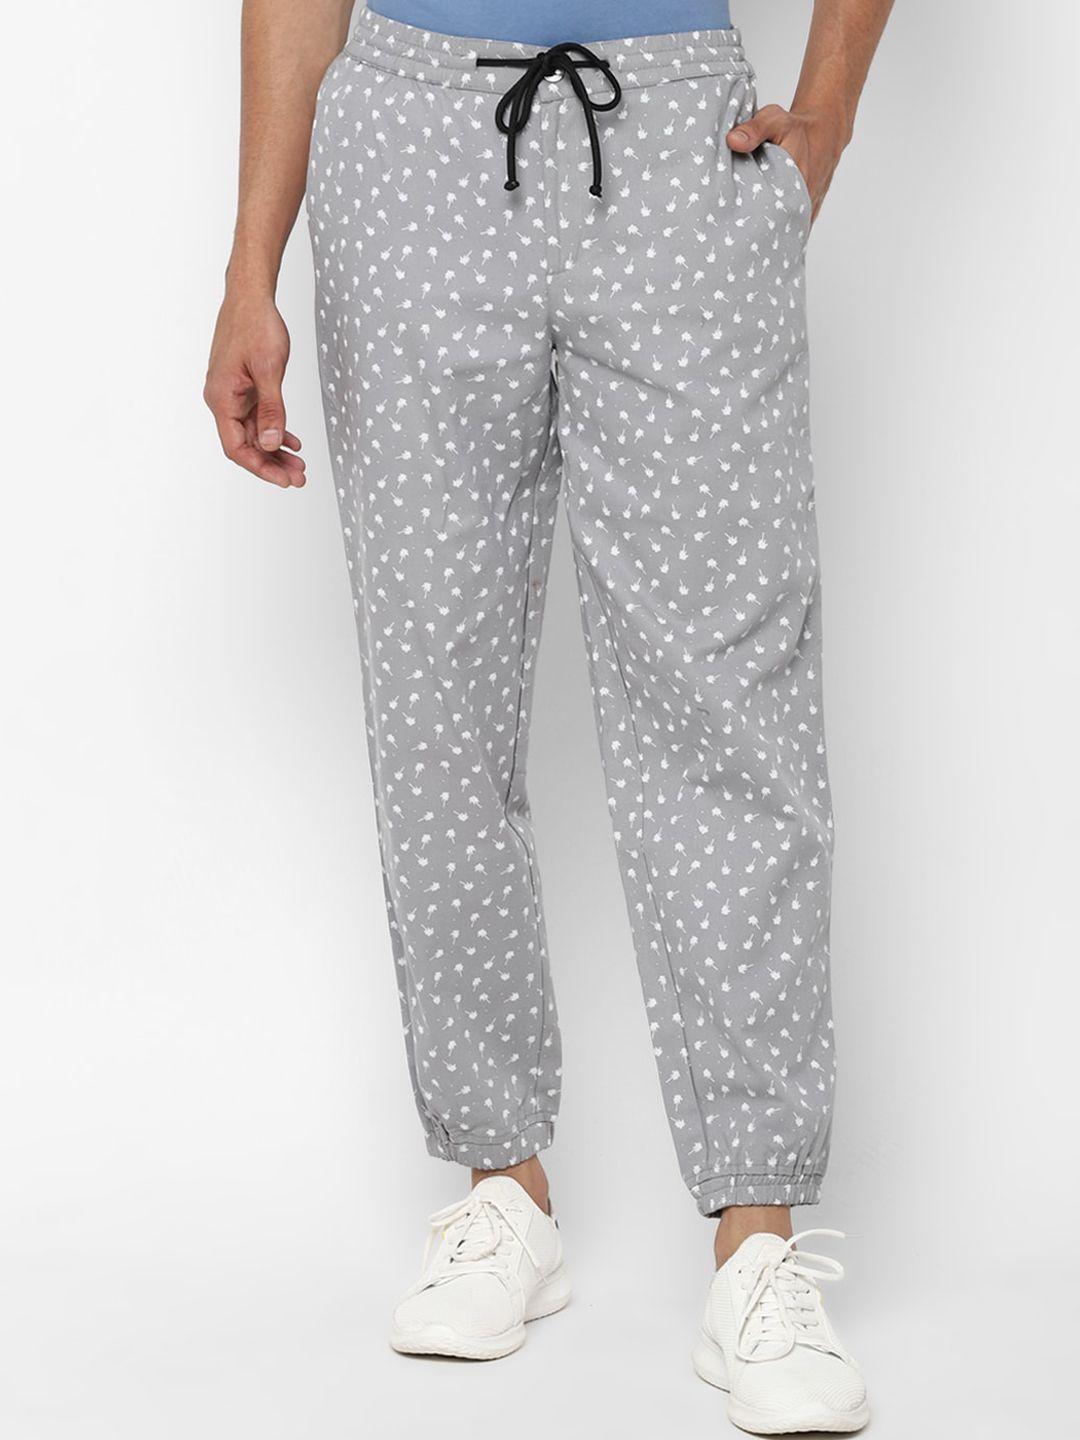 forever-21-men-grey-printed-joggers-trousers